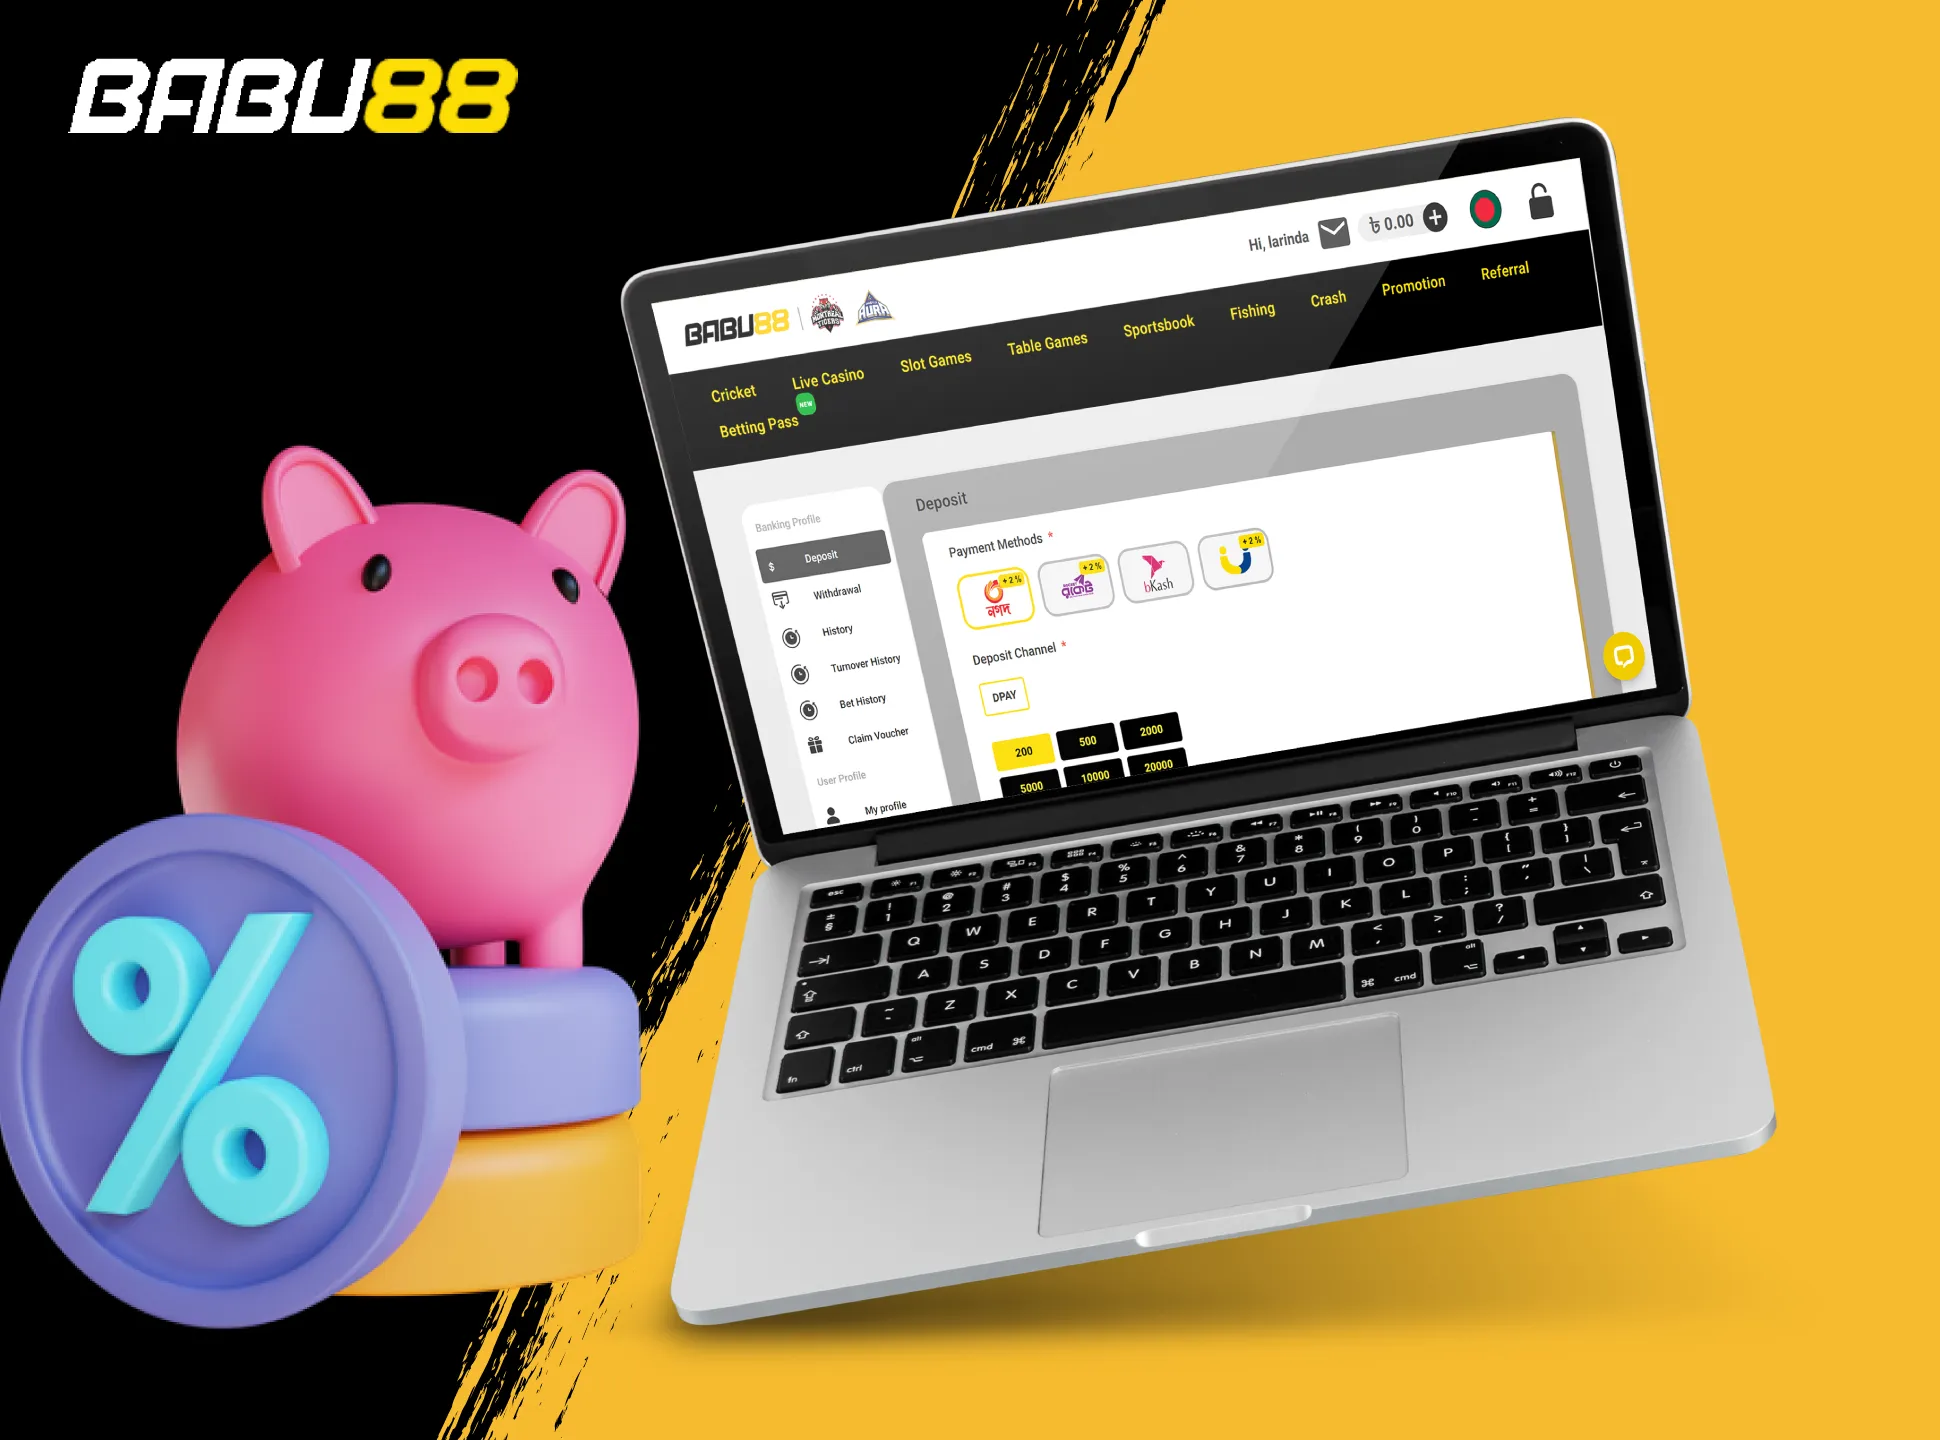 Enter your Babu88 account, go to the deposit page and top up your account.